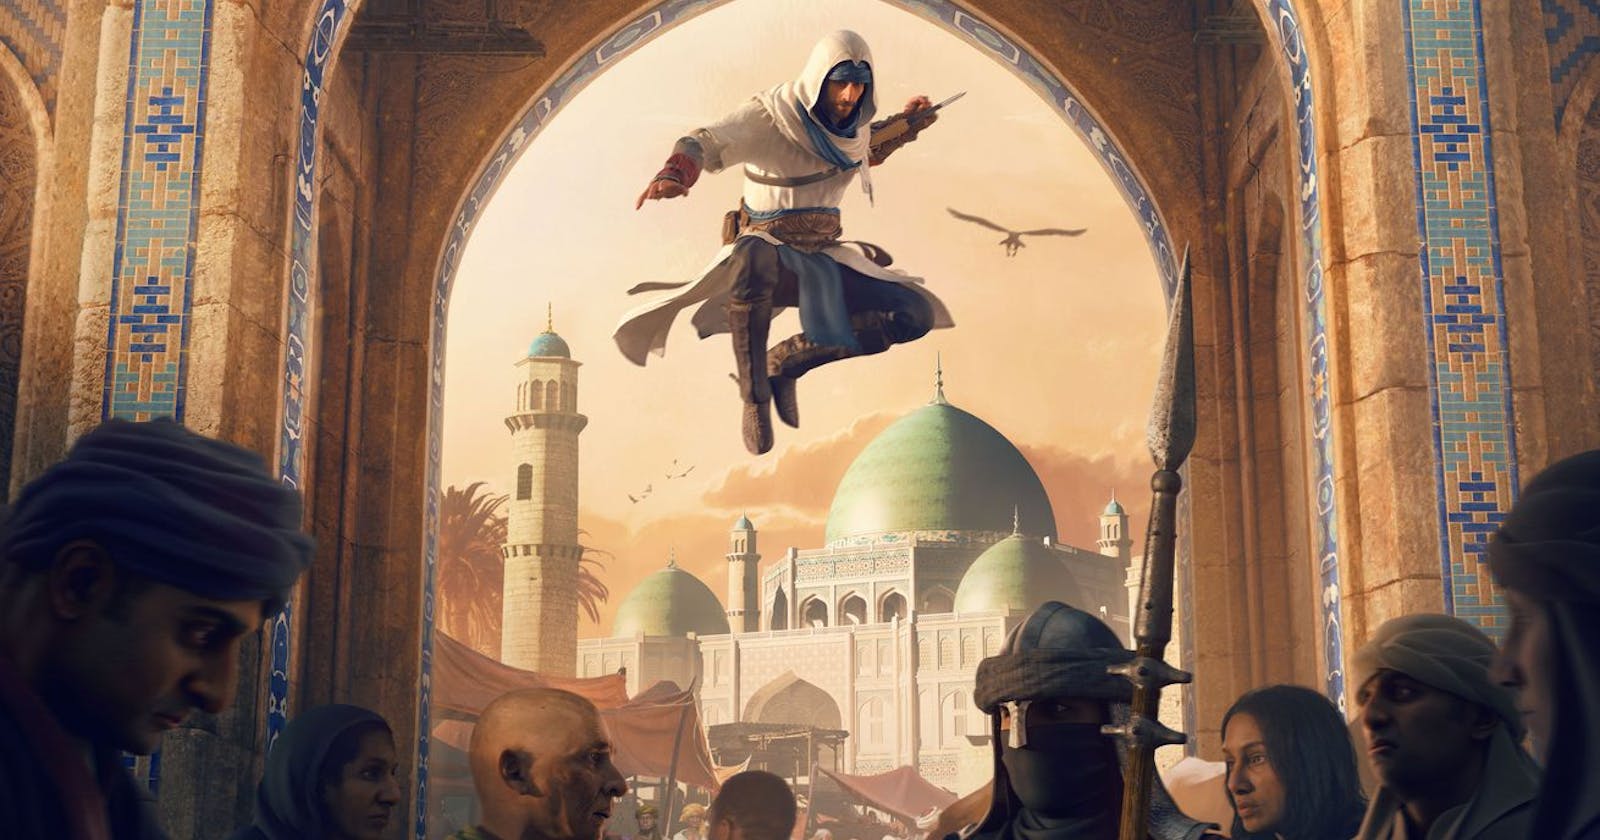 Ubisoft announces new Assassin’s Creed games set in Baghdad, Japan, and more